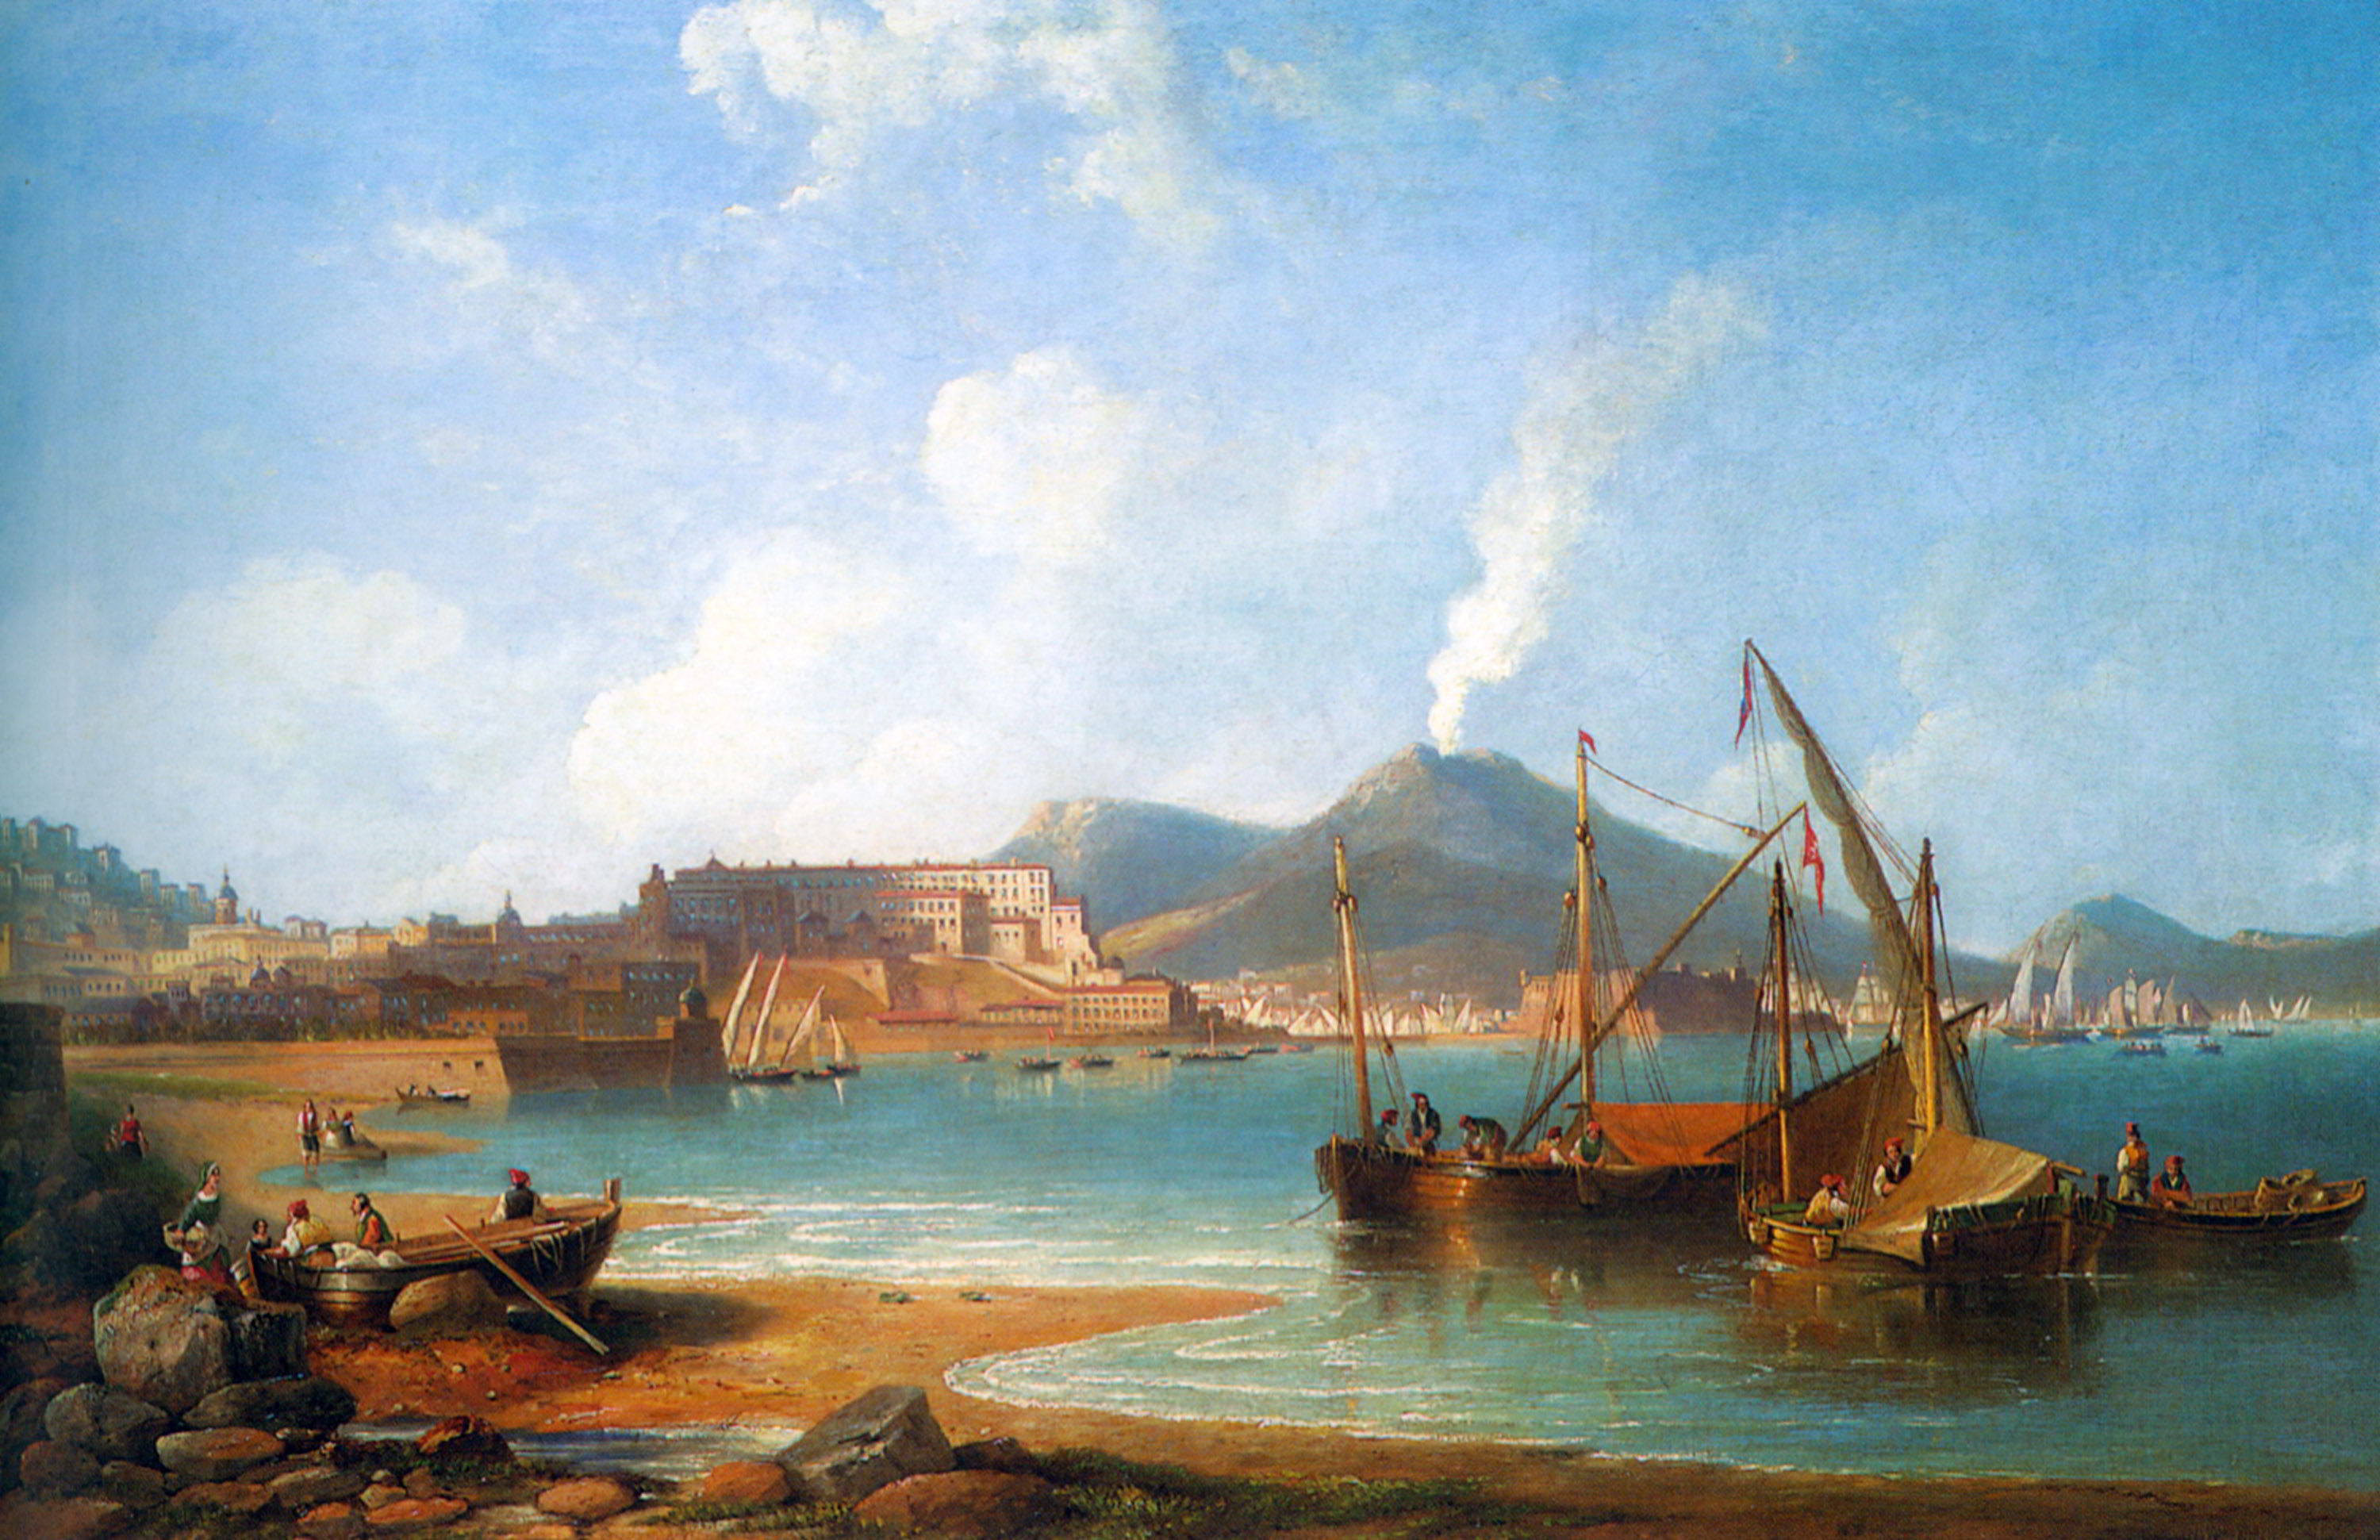 The Bay of Naples by James Wilson Carmichael